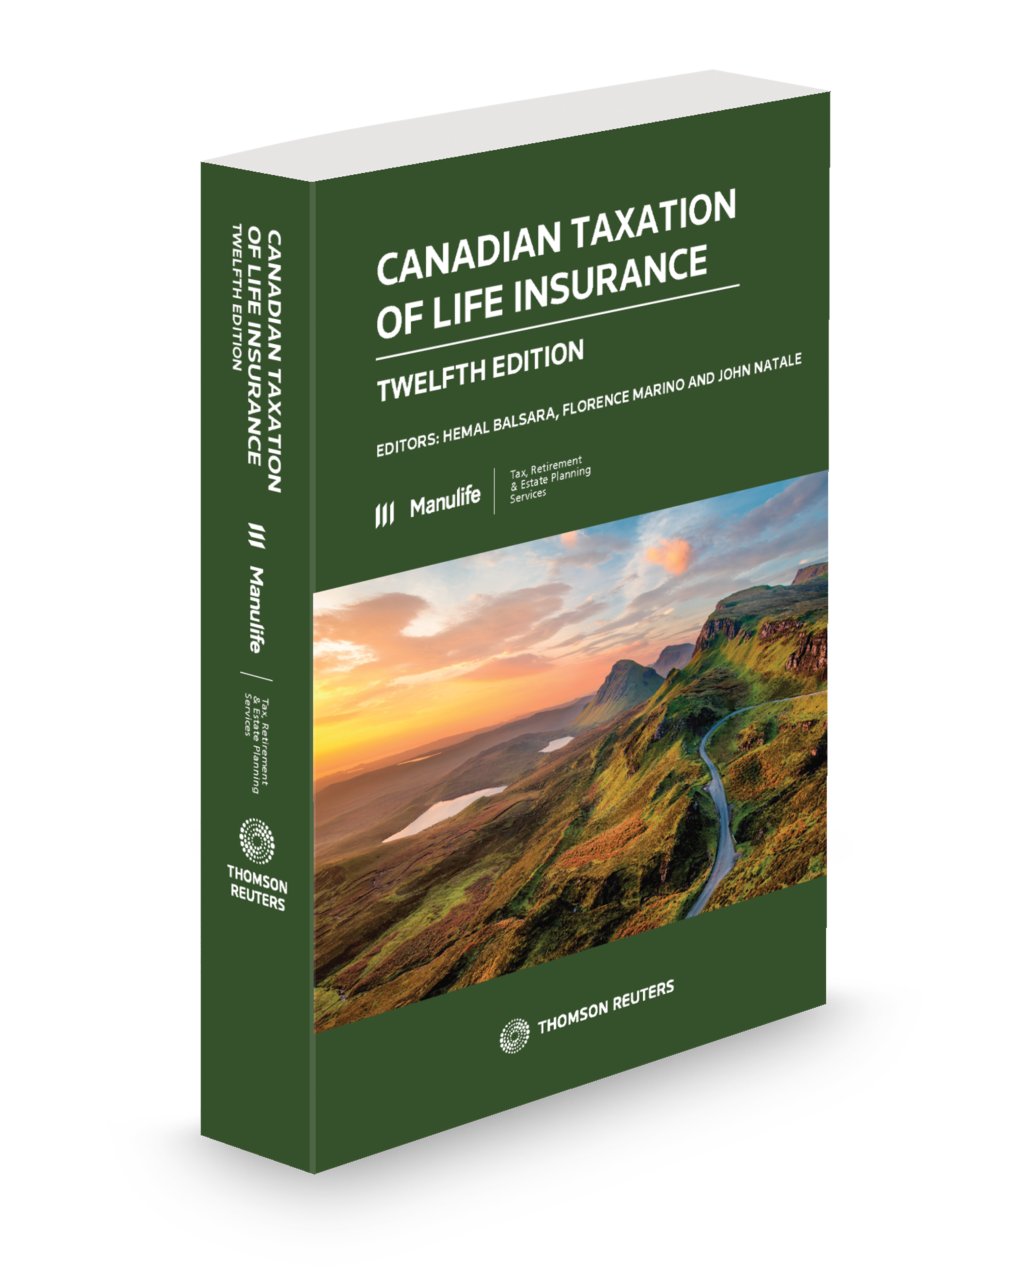 Image of Canadian Taxation of Life Insurance 12th Edition